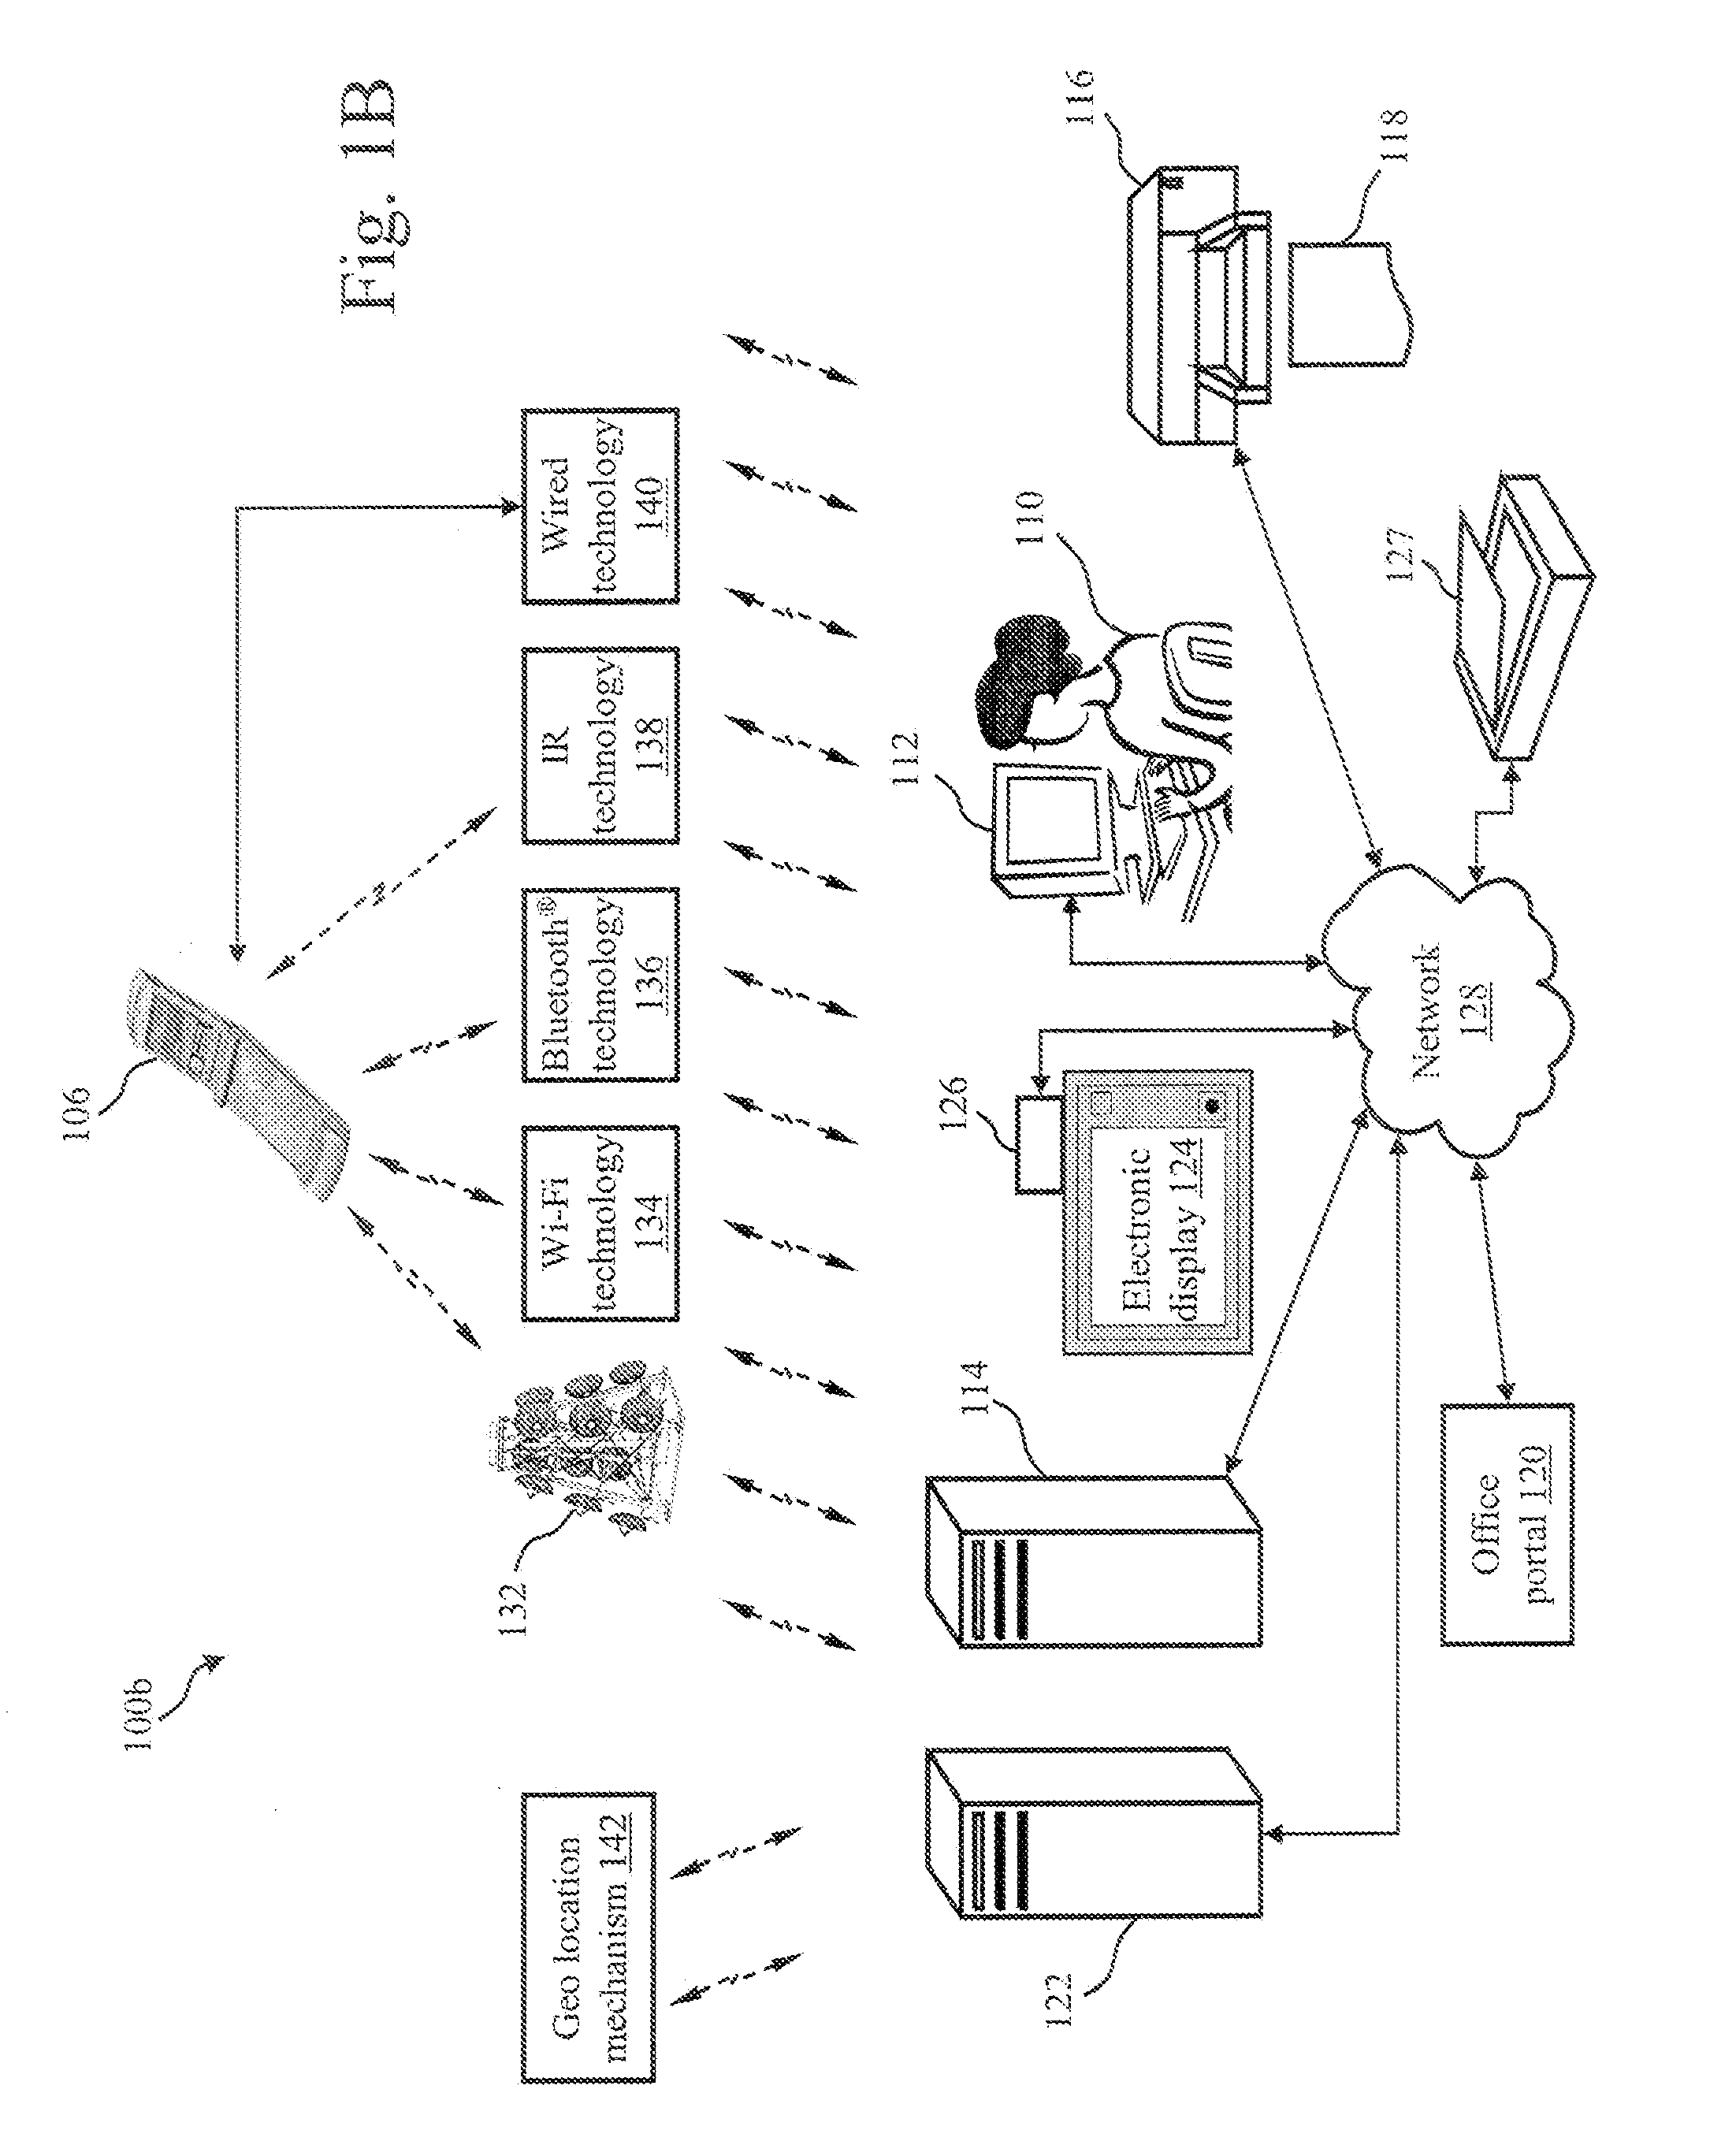 Method and system for image matching in a mixed media environment